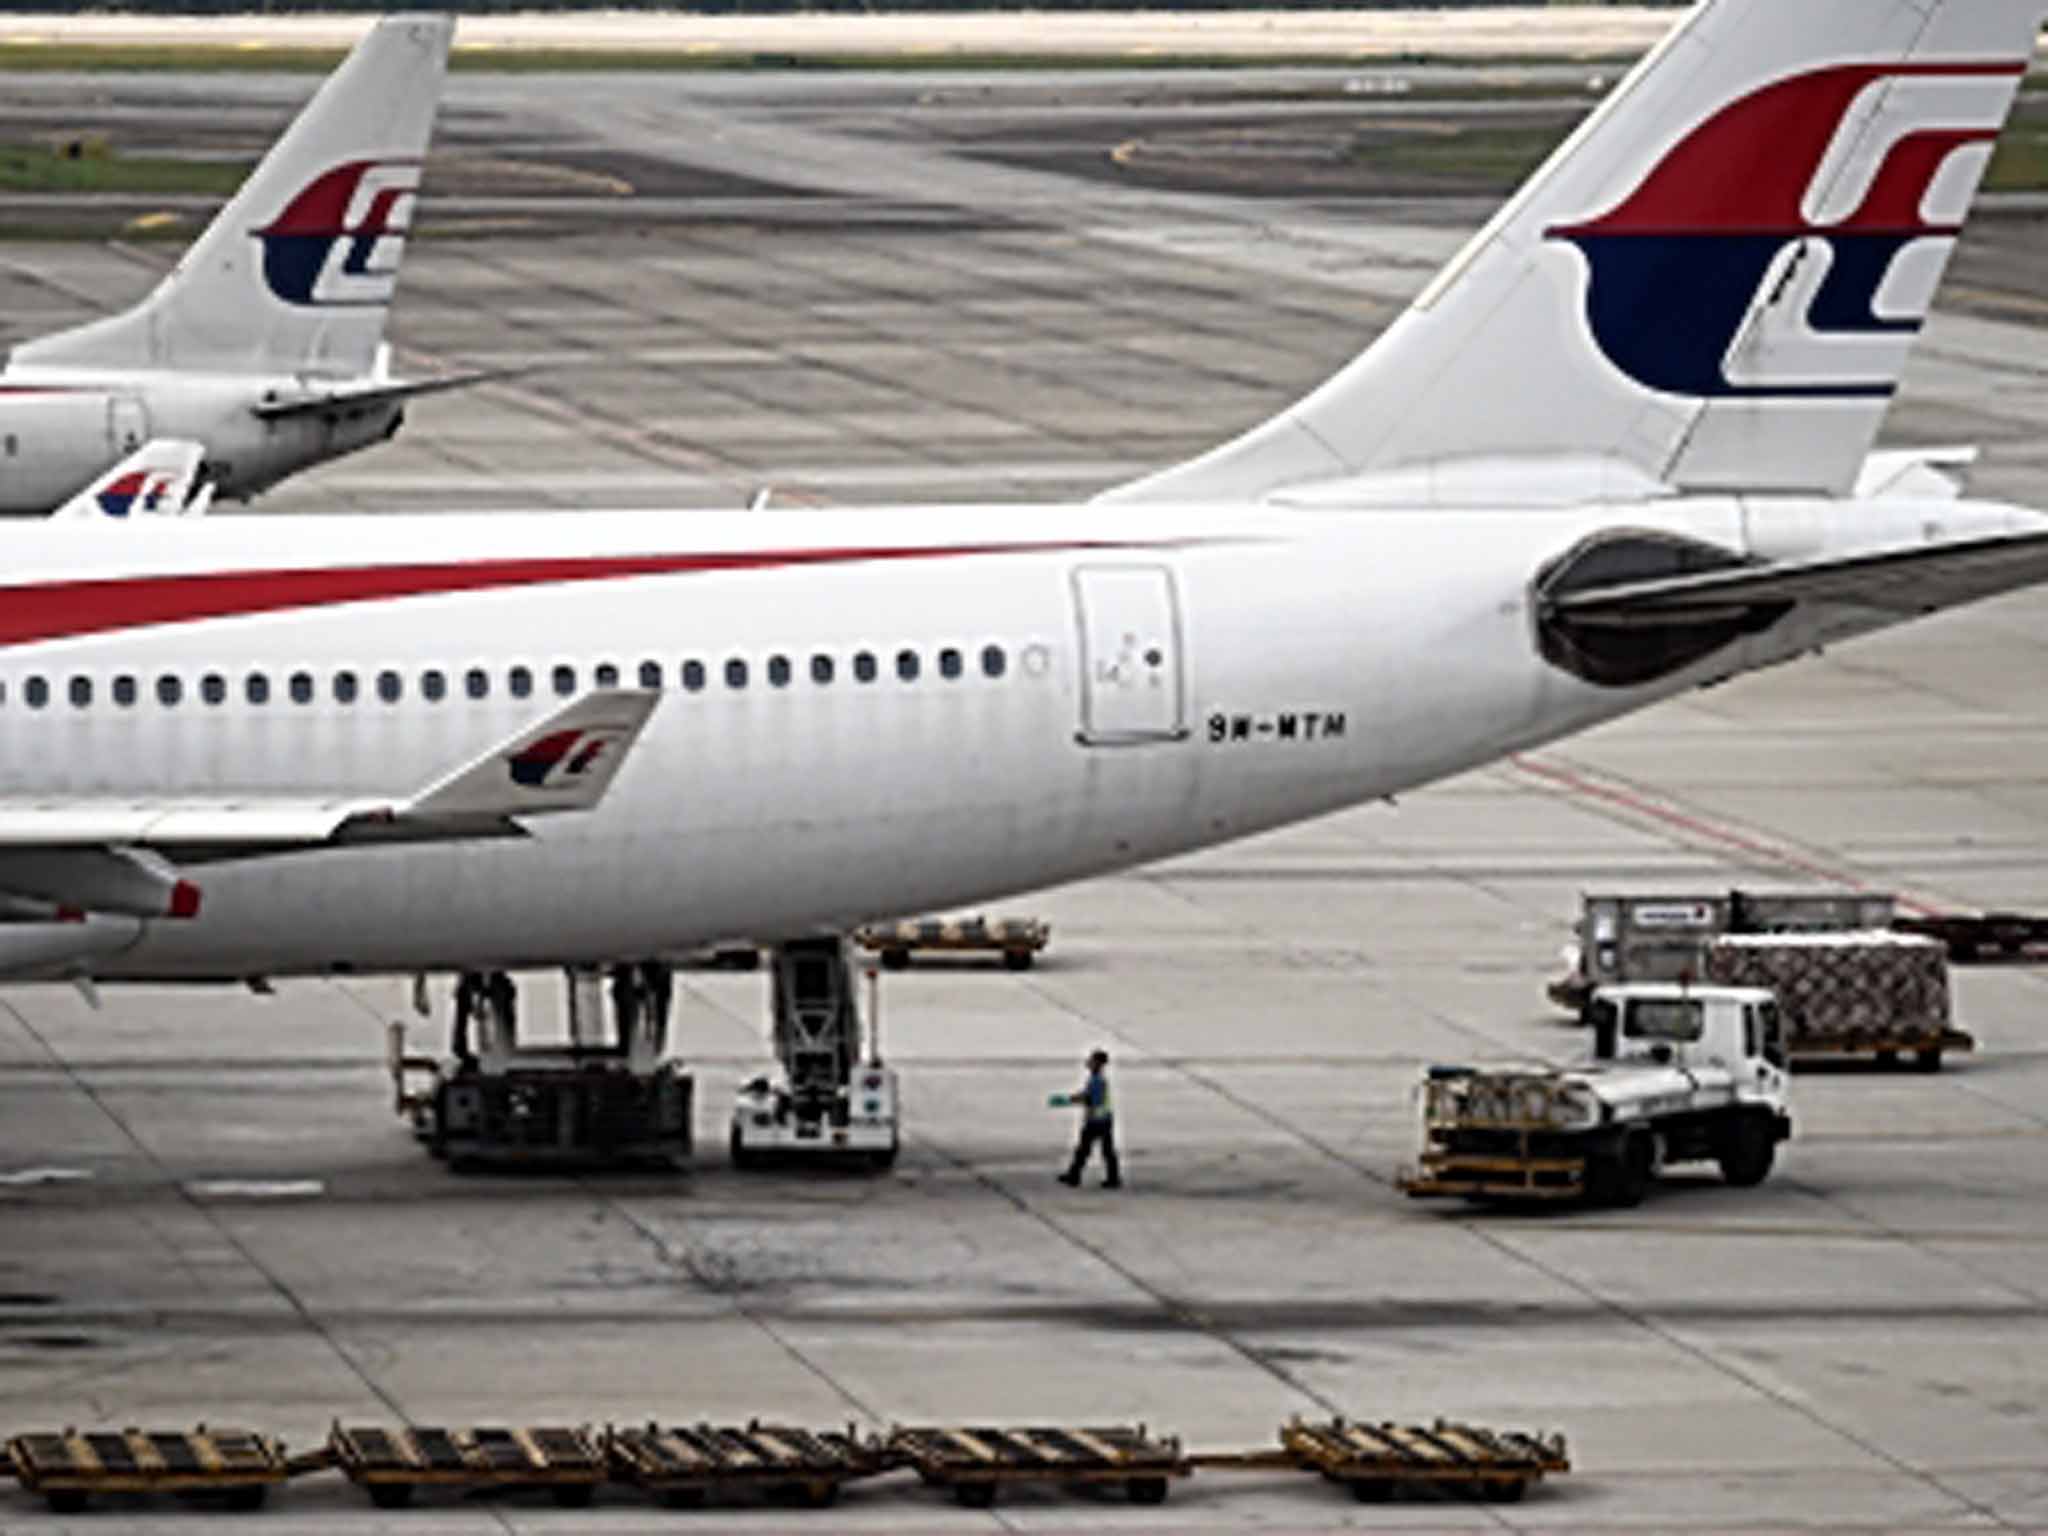 Plane sailing? It's business as usual for Malaysia Airlines